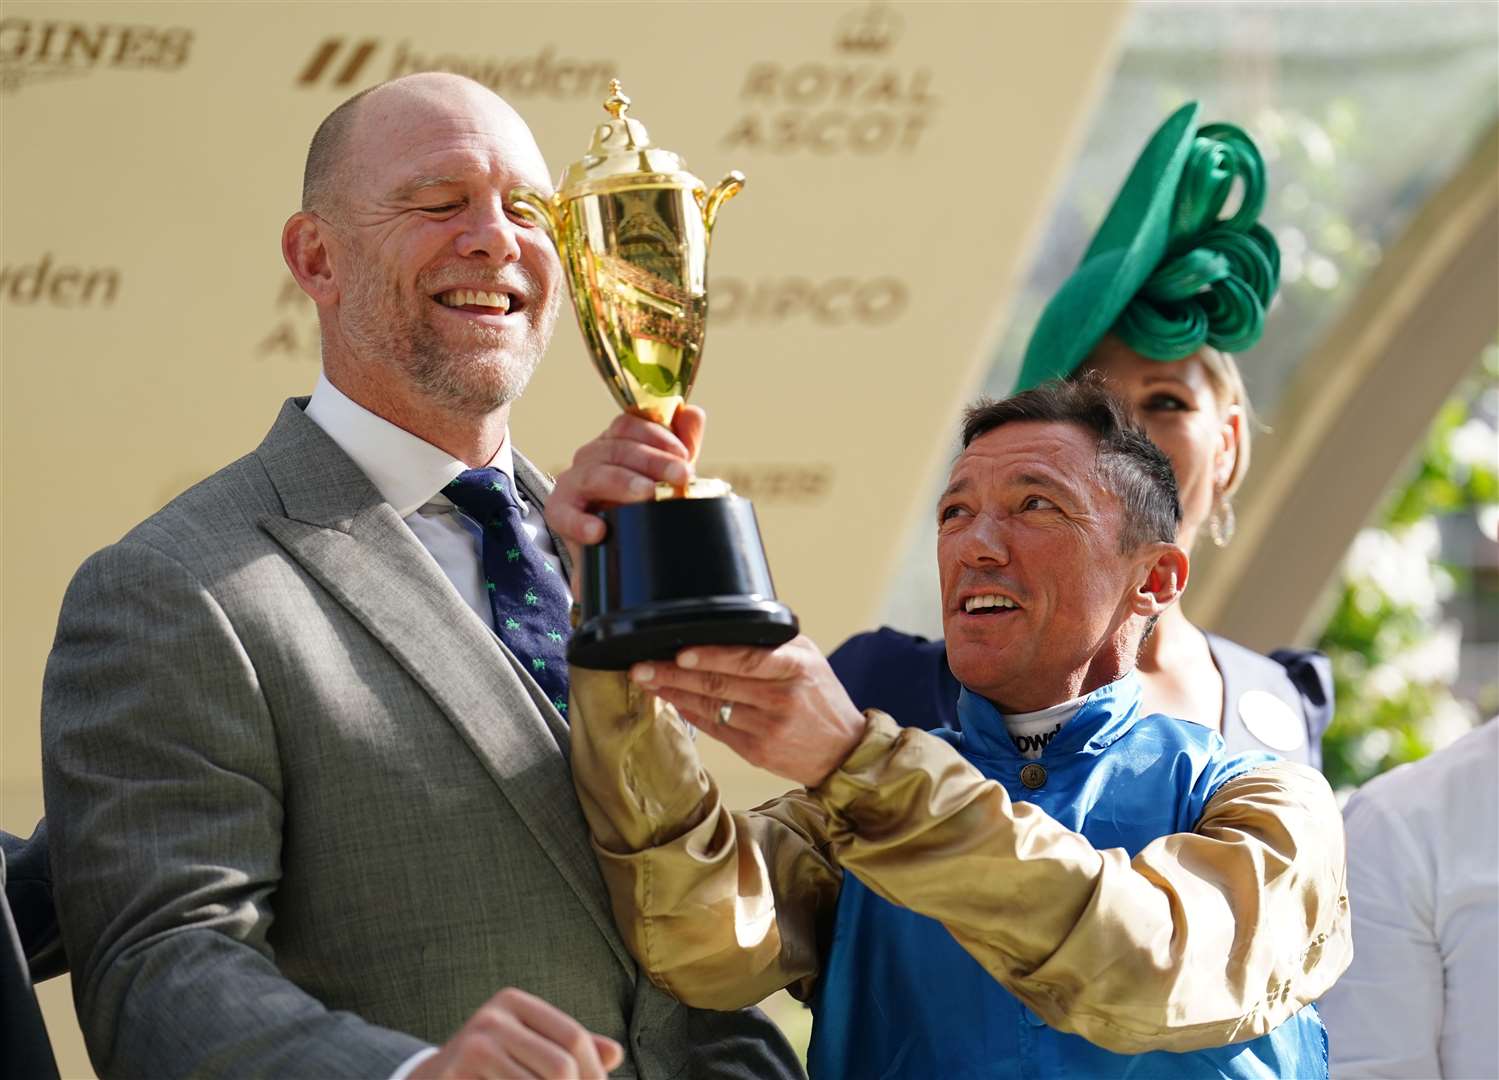 Frankie Dettori celebrates after being presented with a trophy by Mike Tindall and Zara Tindall after winning the Queen’s Vase on Gregory (David Davies/PA)